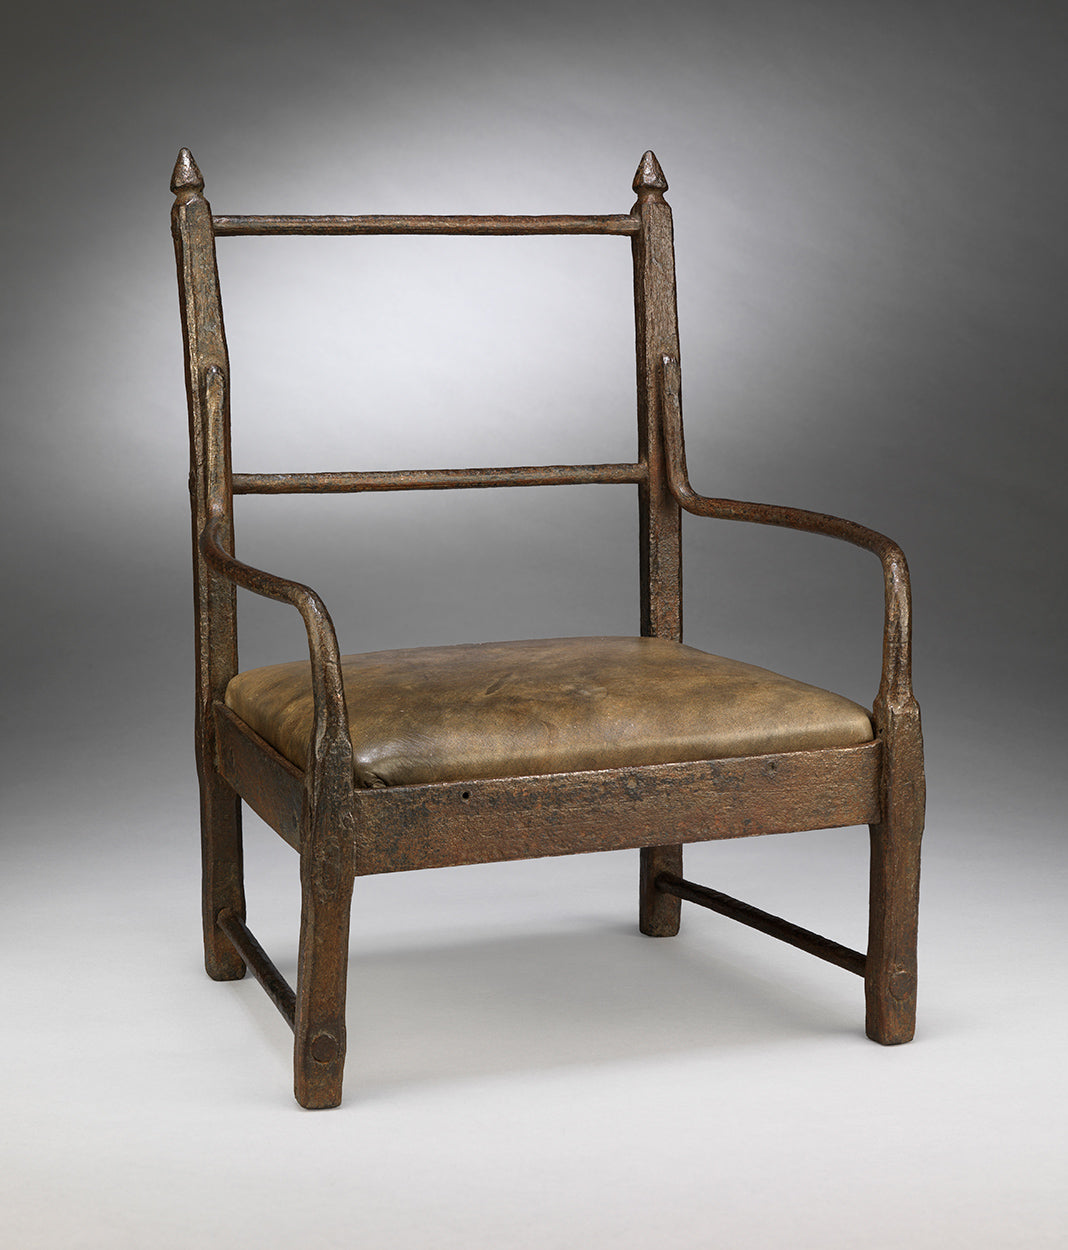 Remarkable Early Iron Frame Vernacular Child's Chair